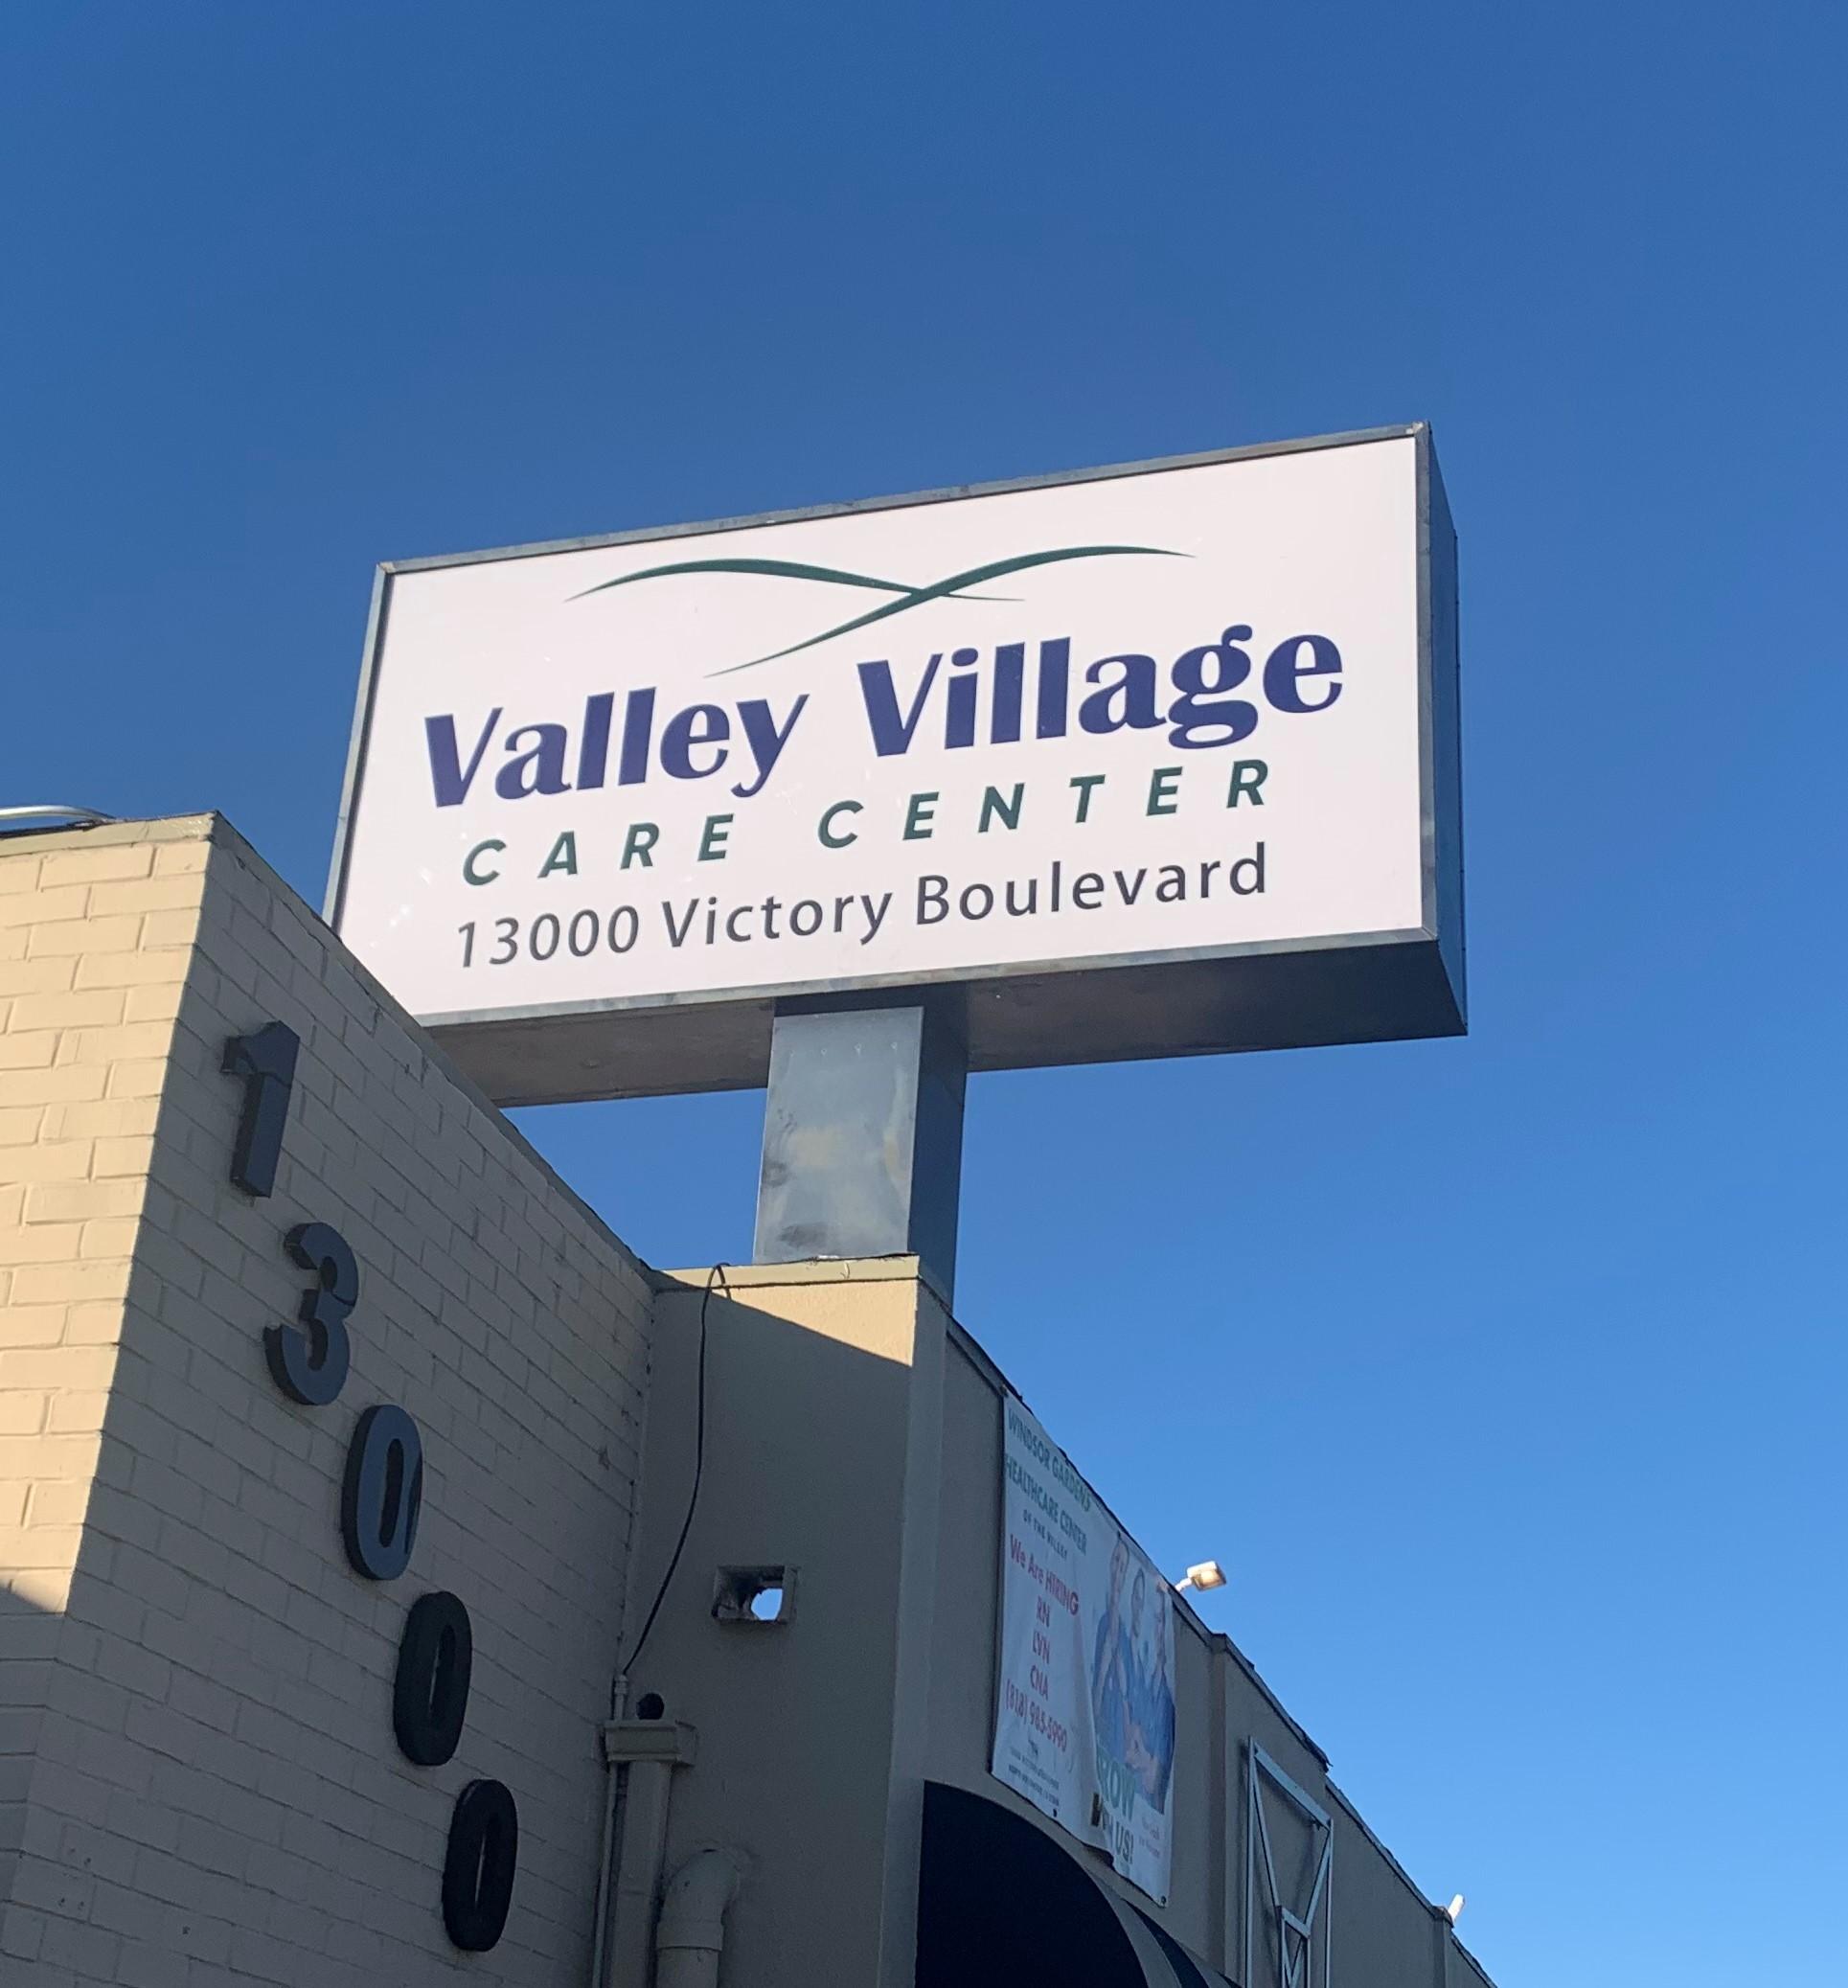 A pylon sign is a sure way to get noticed. Like this one we fabricated and installed for Valley Village Care Center's North Hollywood location.